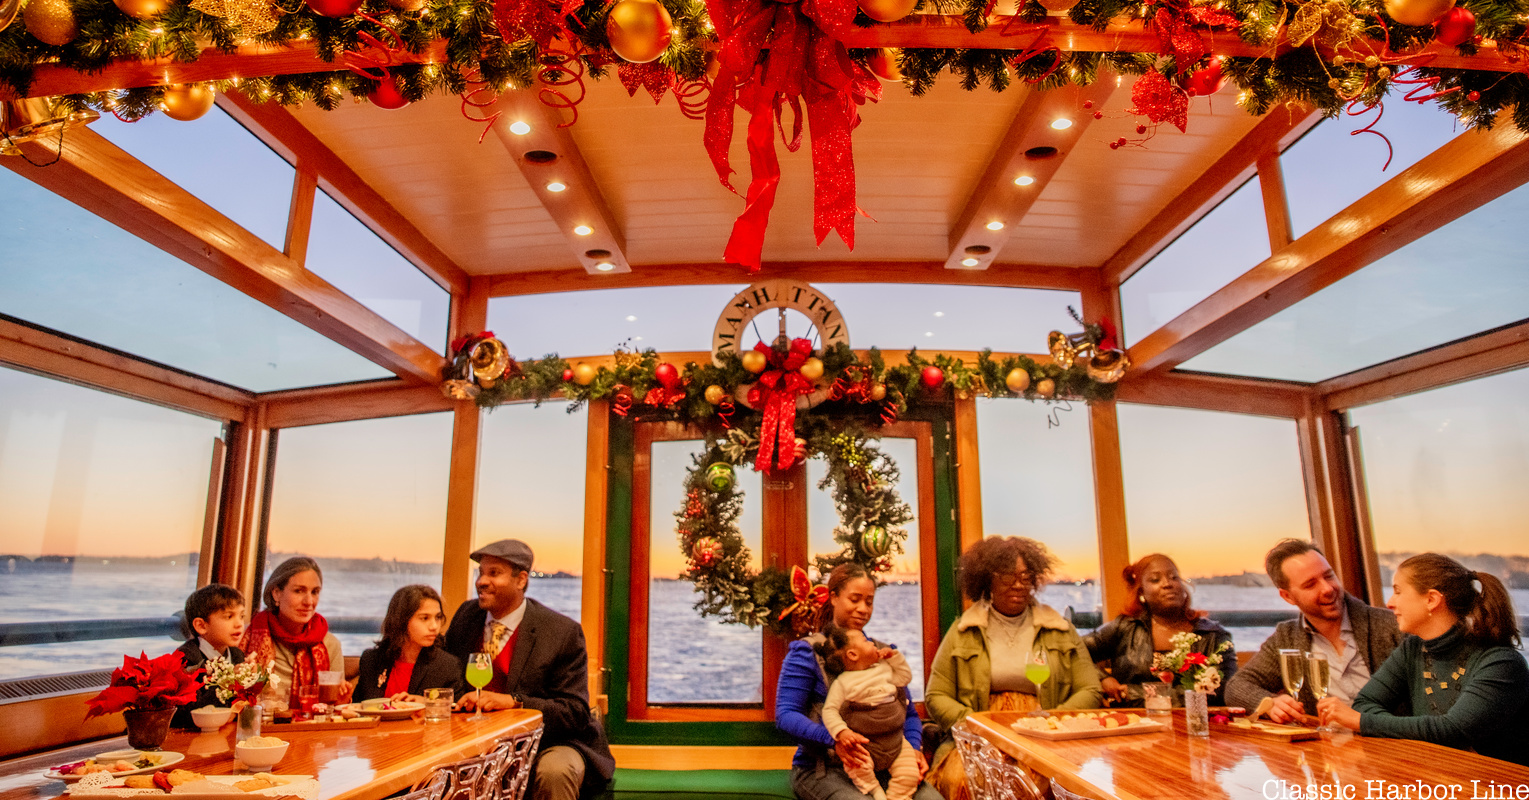 Classic Harbor Line holiday cruise in nYC